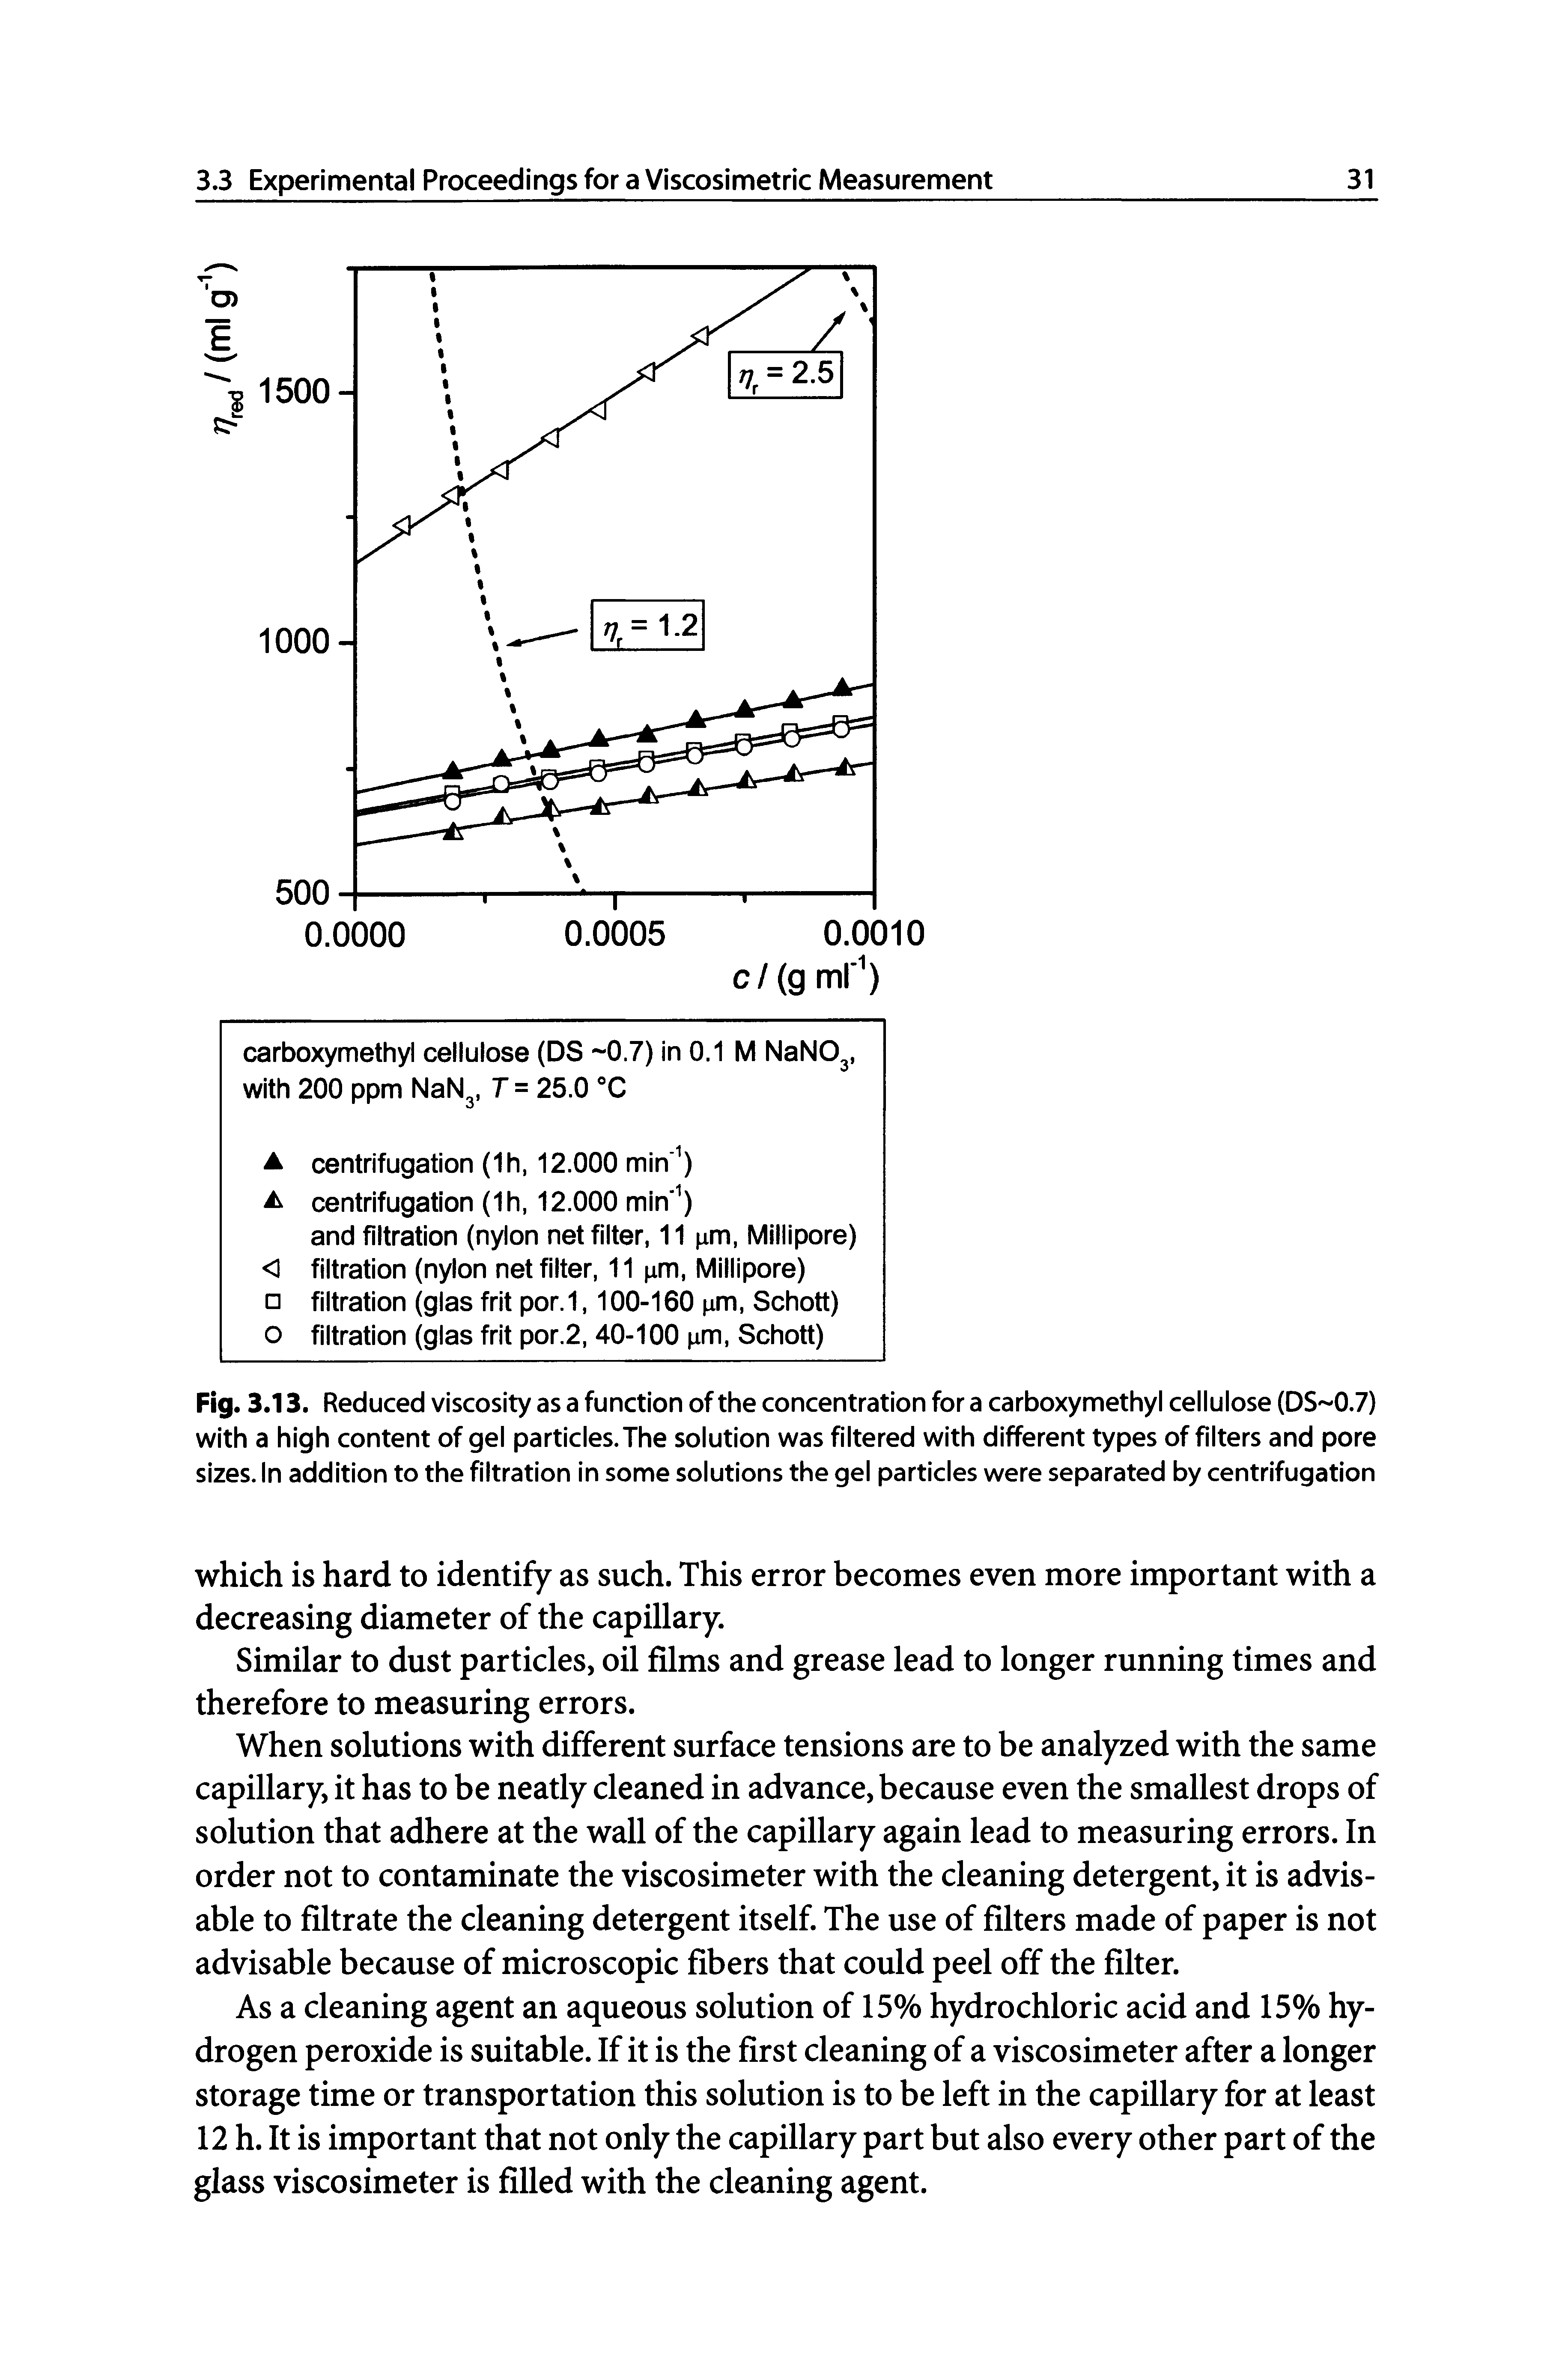 Fig. 3.13. Reduced viscosity as a function of the concentration for a carboxymethyl cellulose (DS-07) with a high content of gel particles. The solution was filtered with different types of filters and pore sizes. In addition to the filtration in some solutions the gel particles were separated by centrifugation...